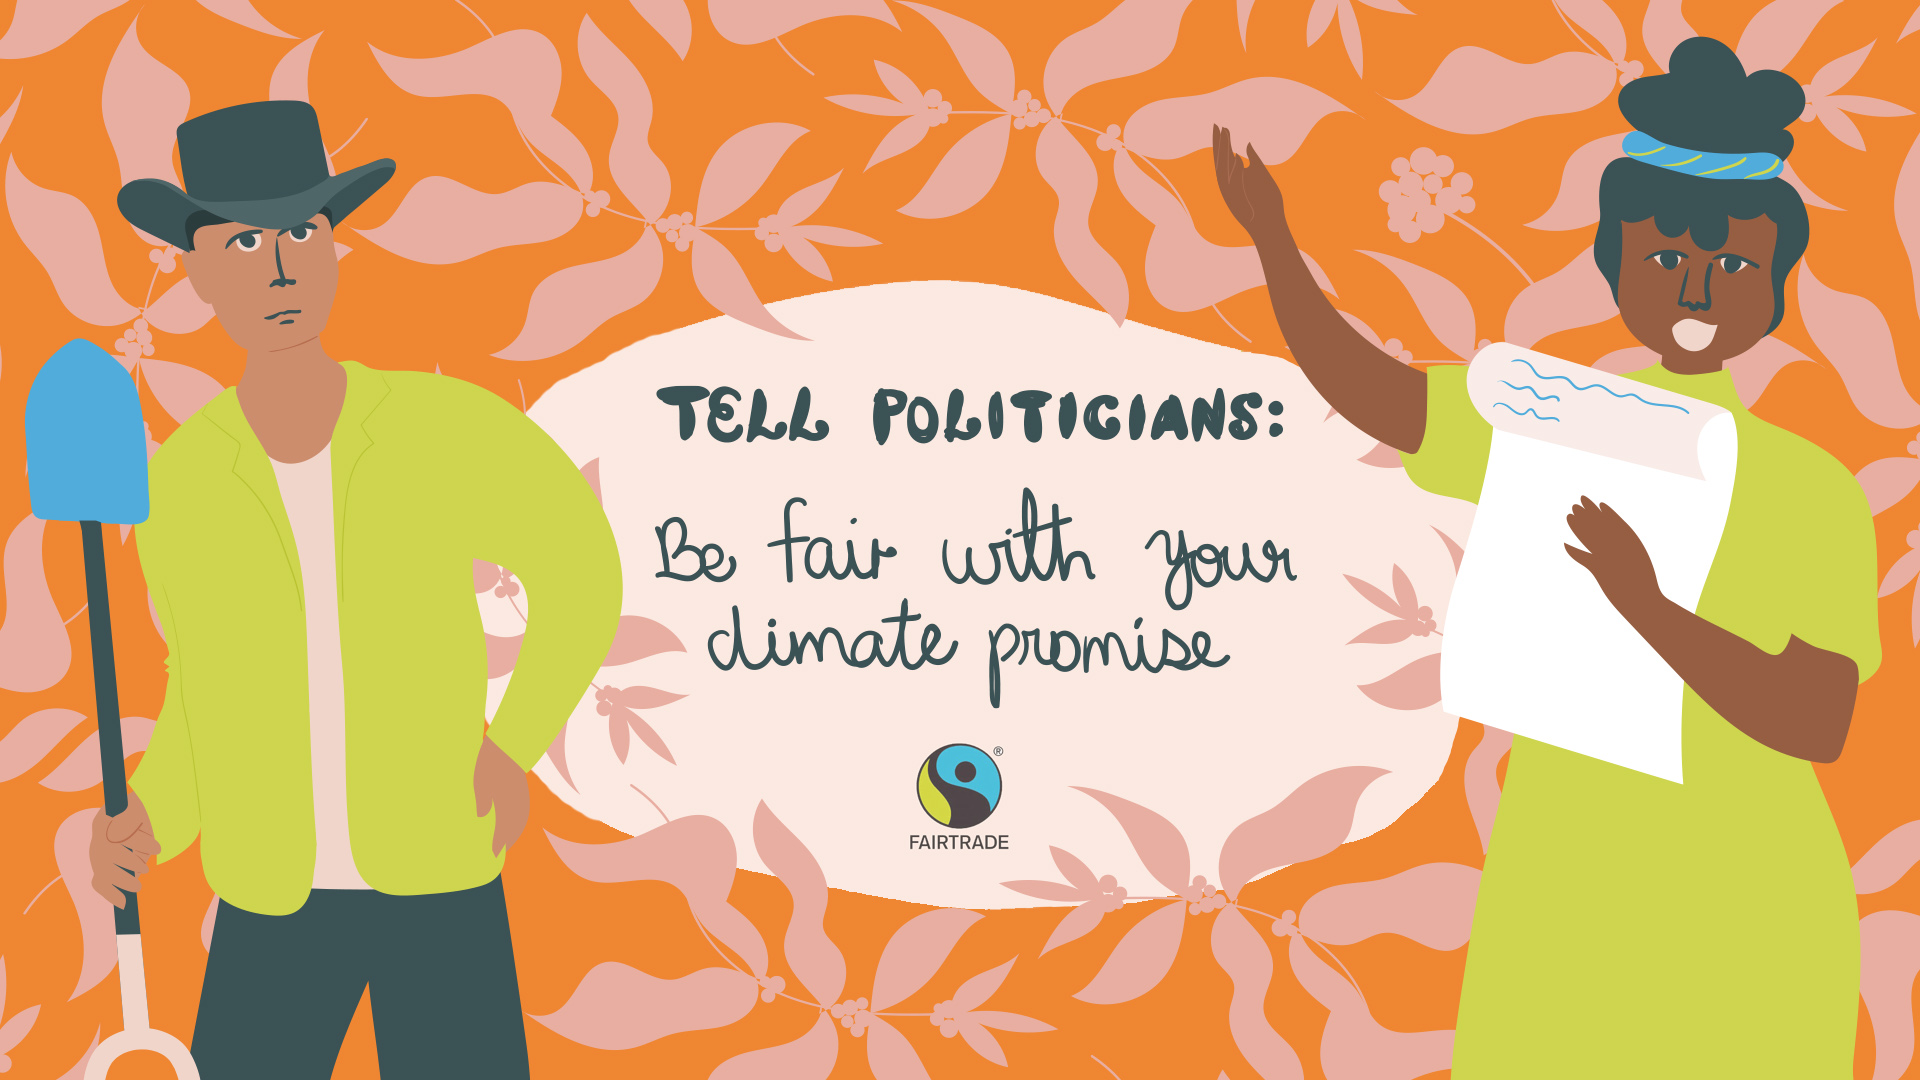 ‘Keep your promises’ – COP26 climate plea from 1.8 million Fairtrade farmers, in open letter to world leaders